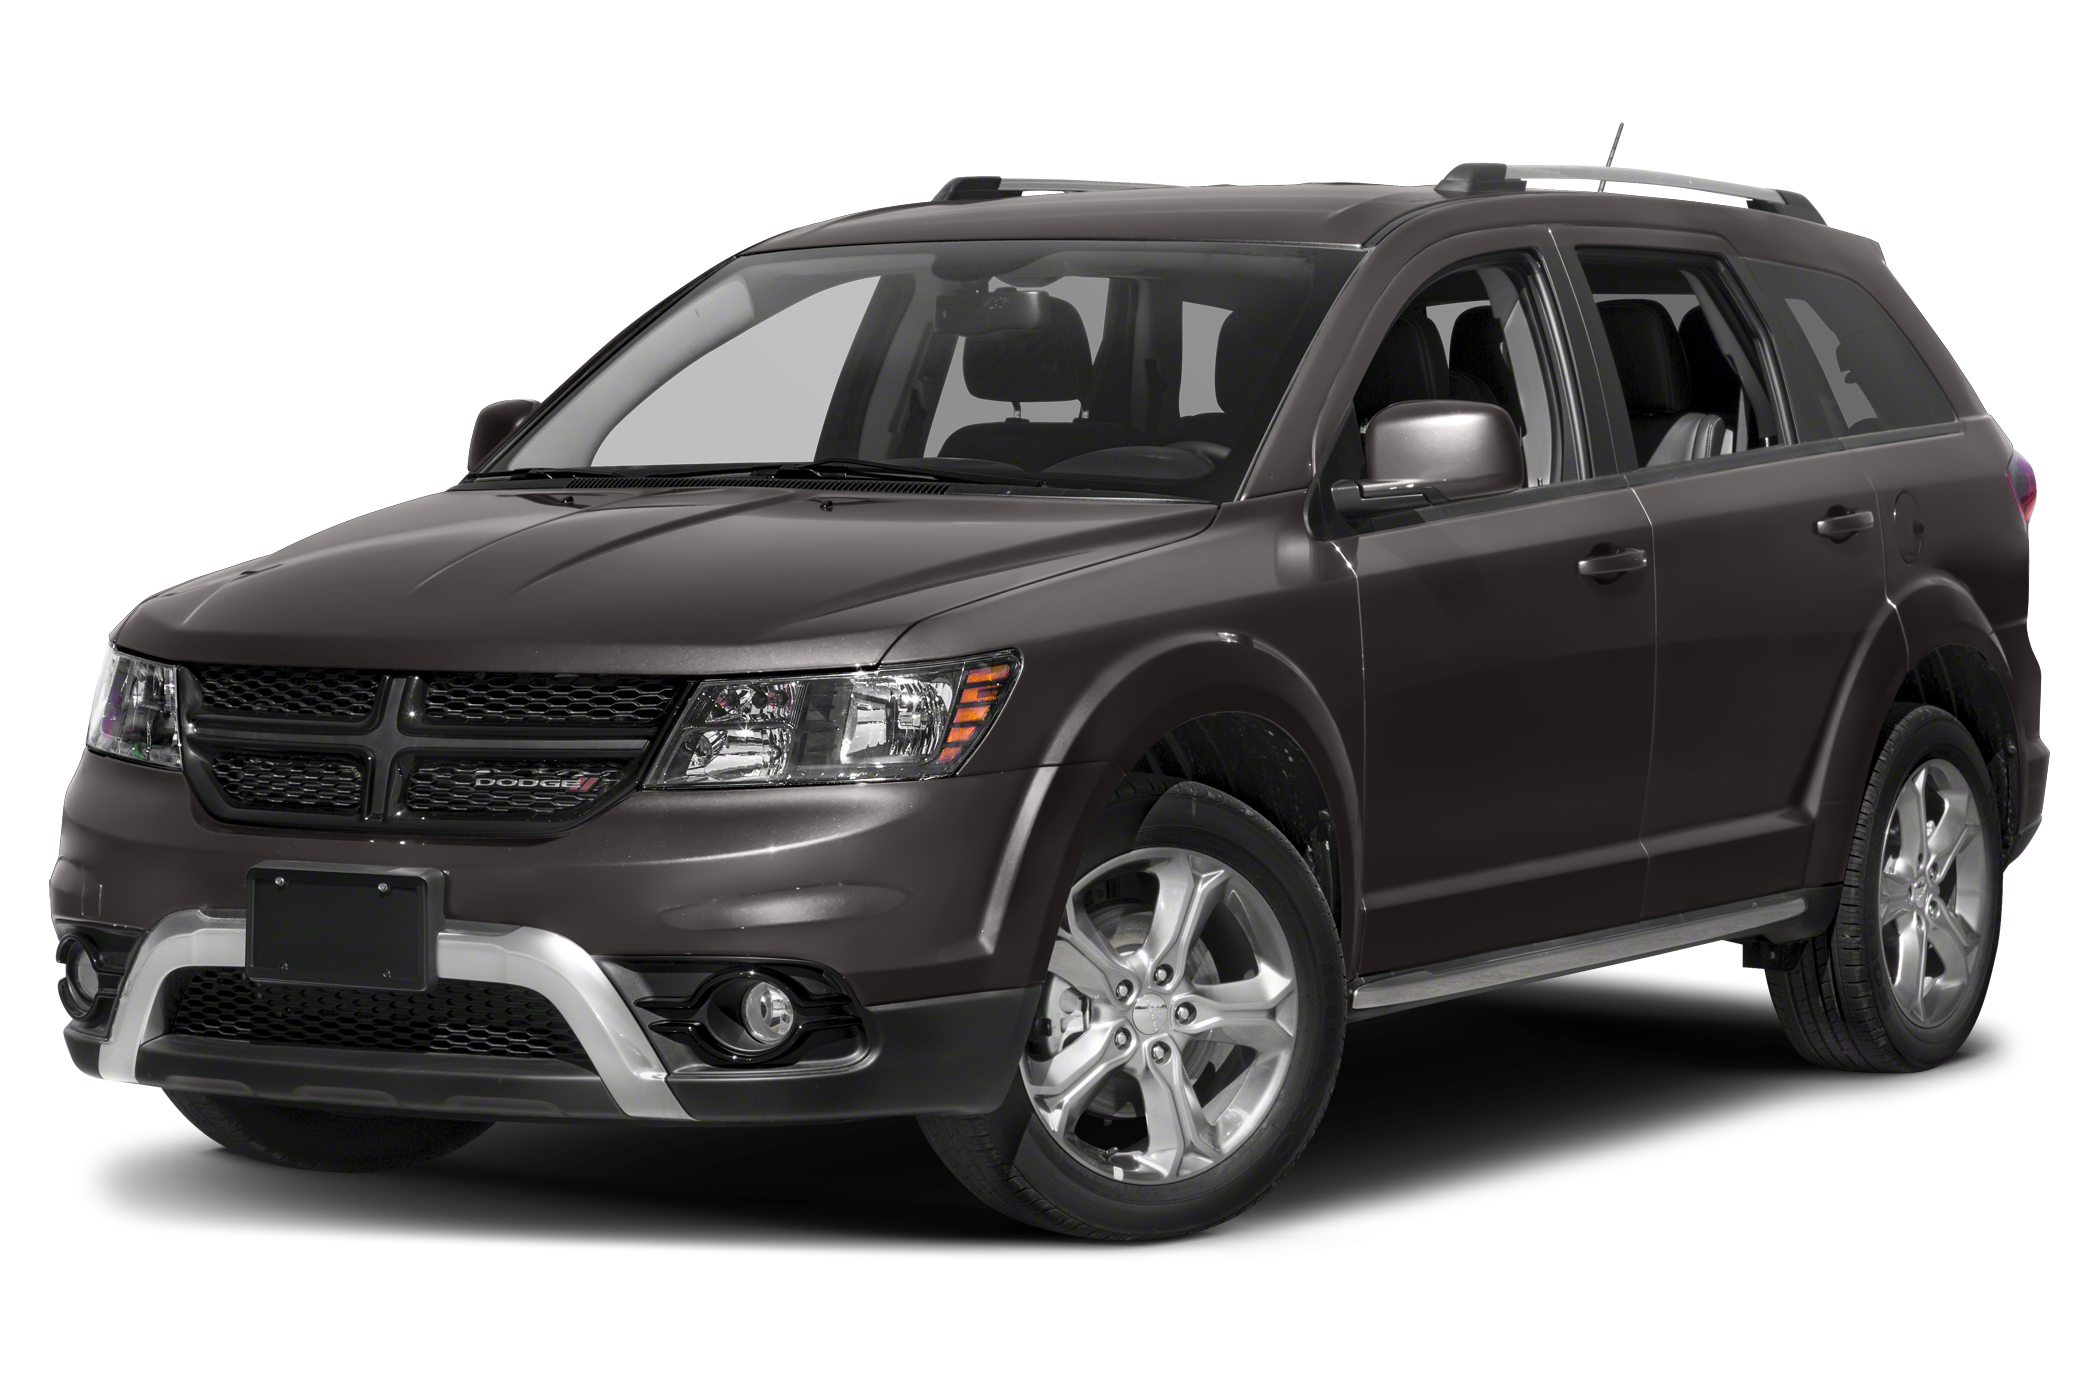 Side view of the 2017 Dodge Journey